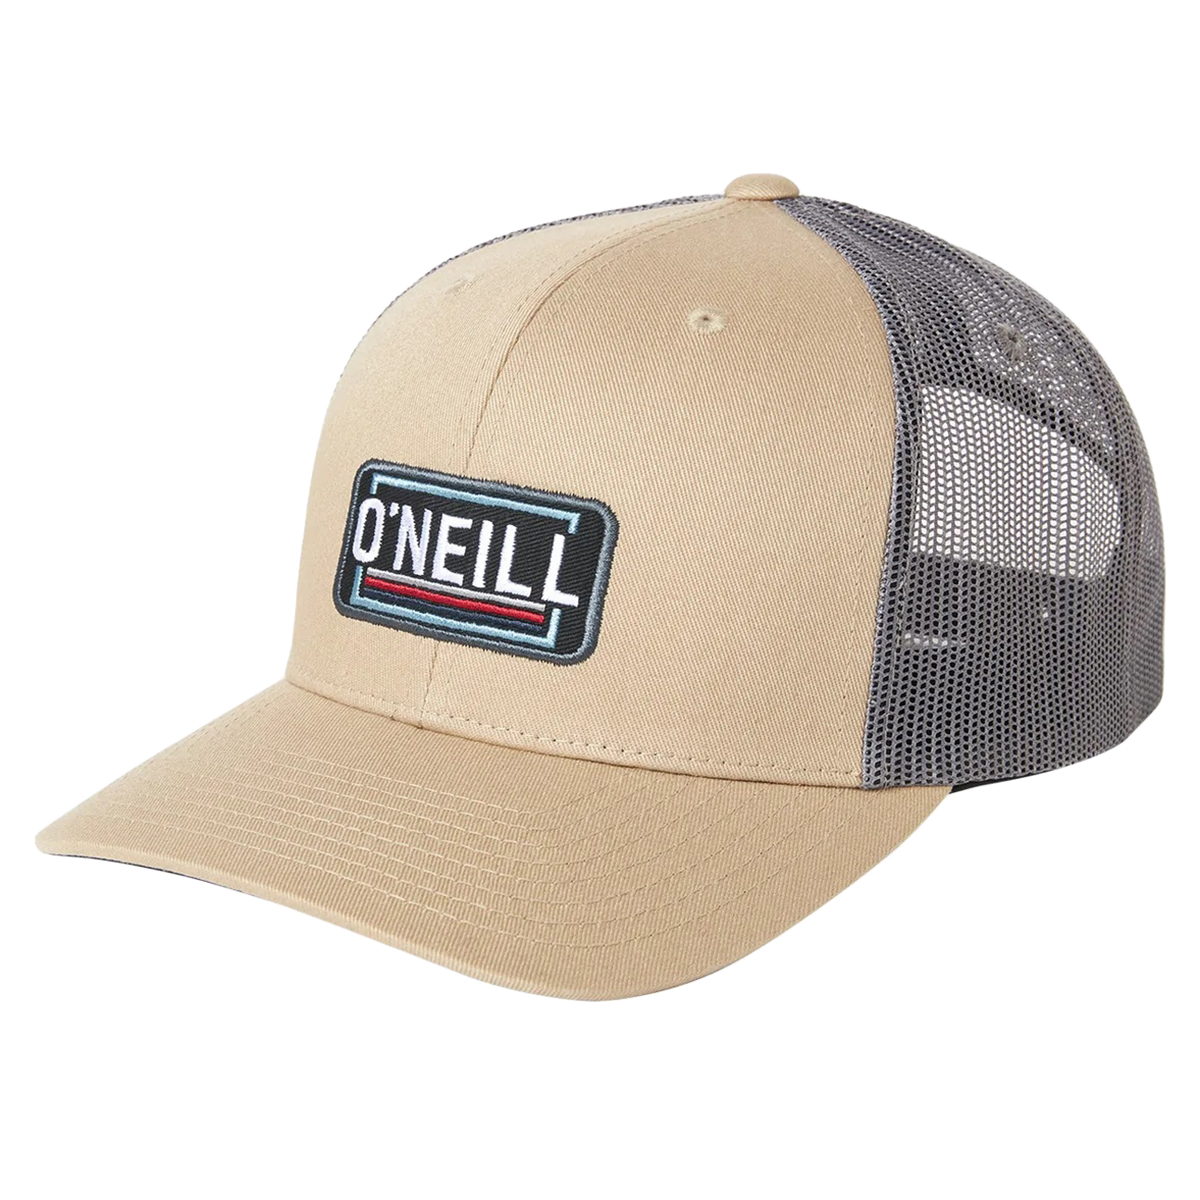 O'neill Young Men's Headquarters Trucker Hat, WHITE